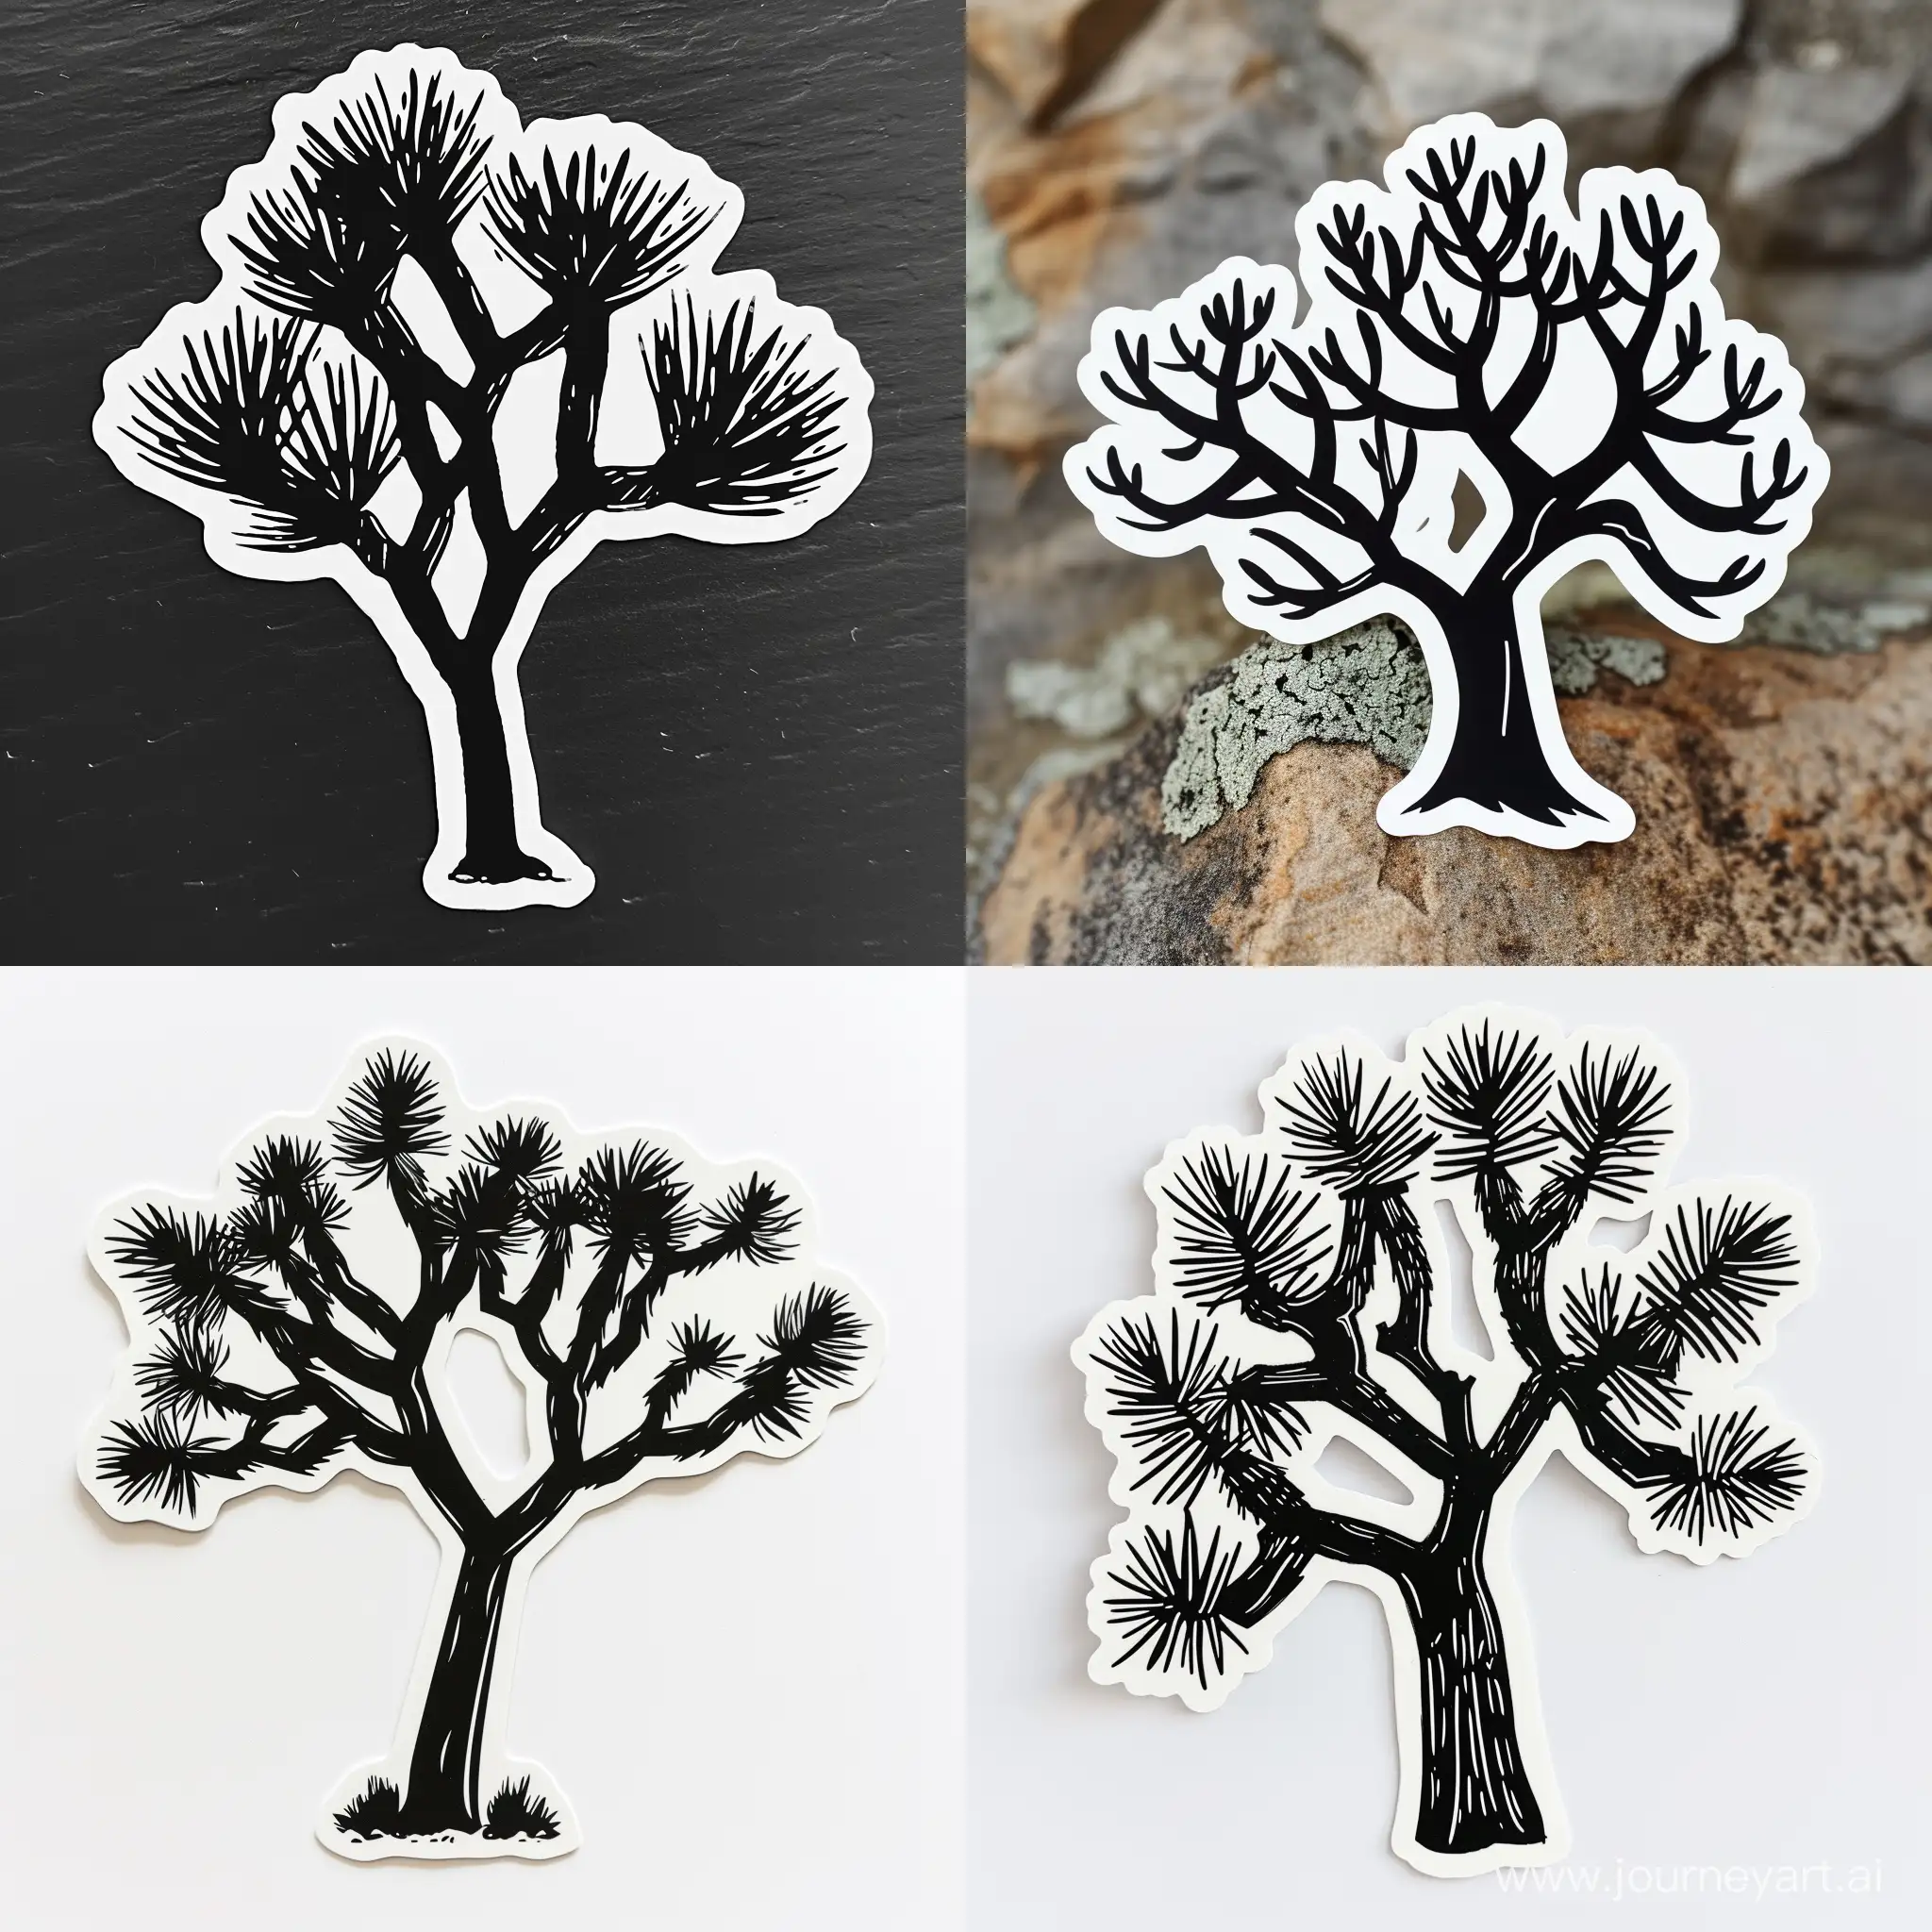 simple sticker of a joshua tree in modern black and white, stylized like pictographs